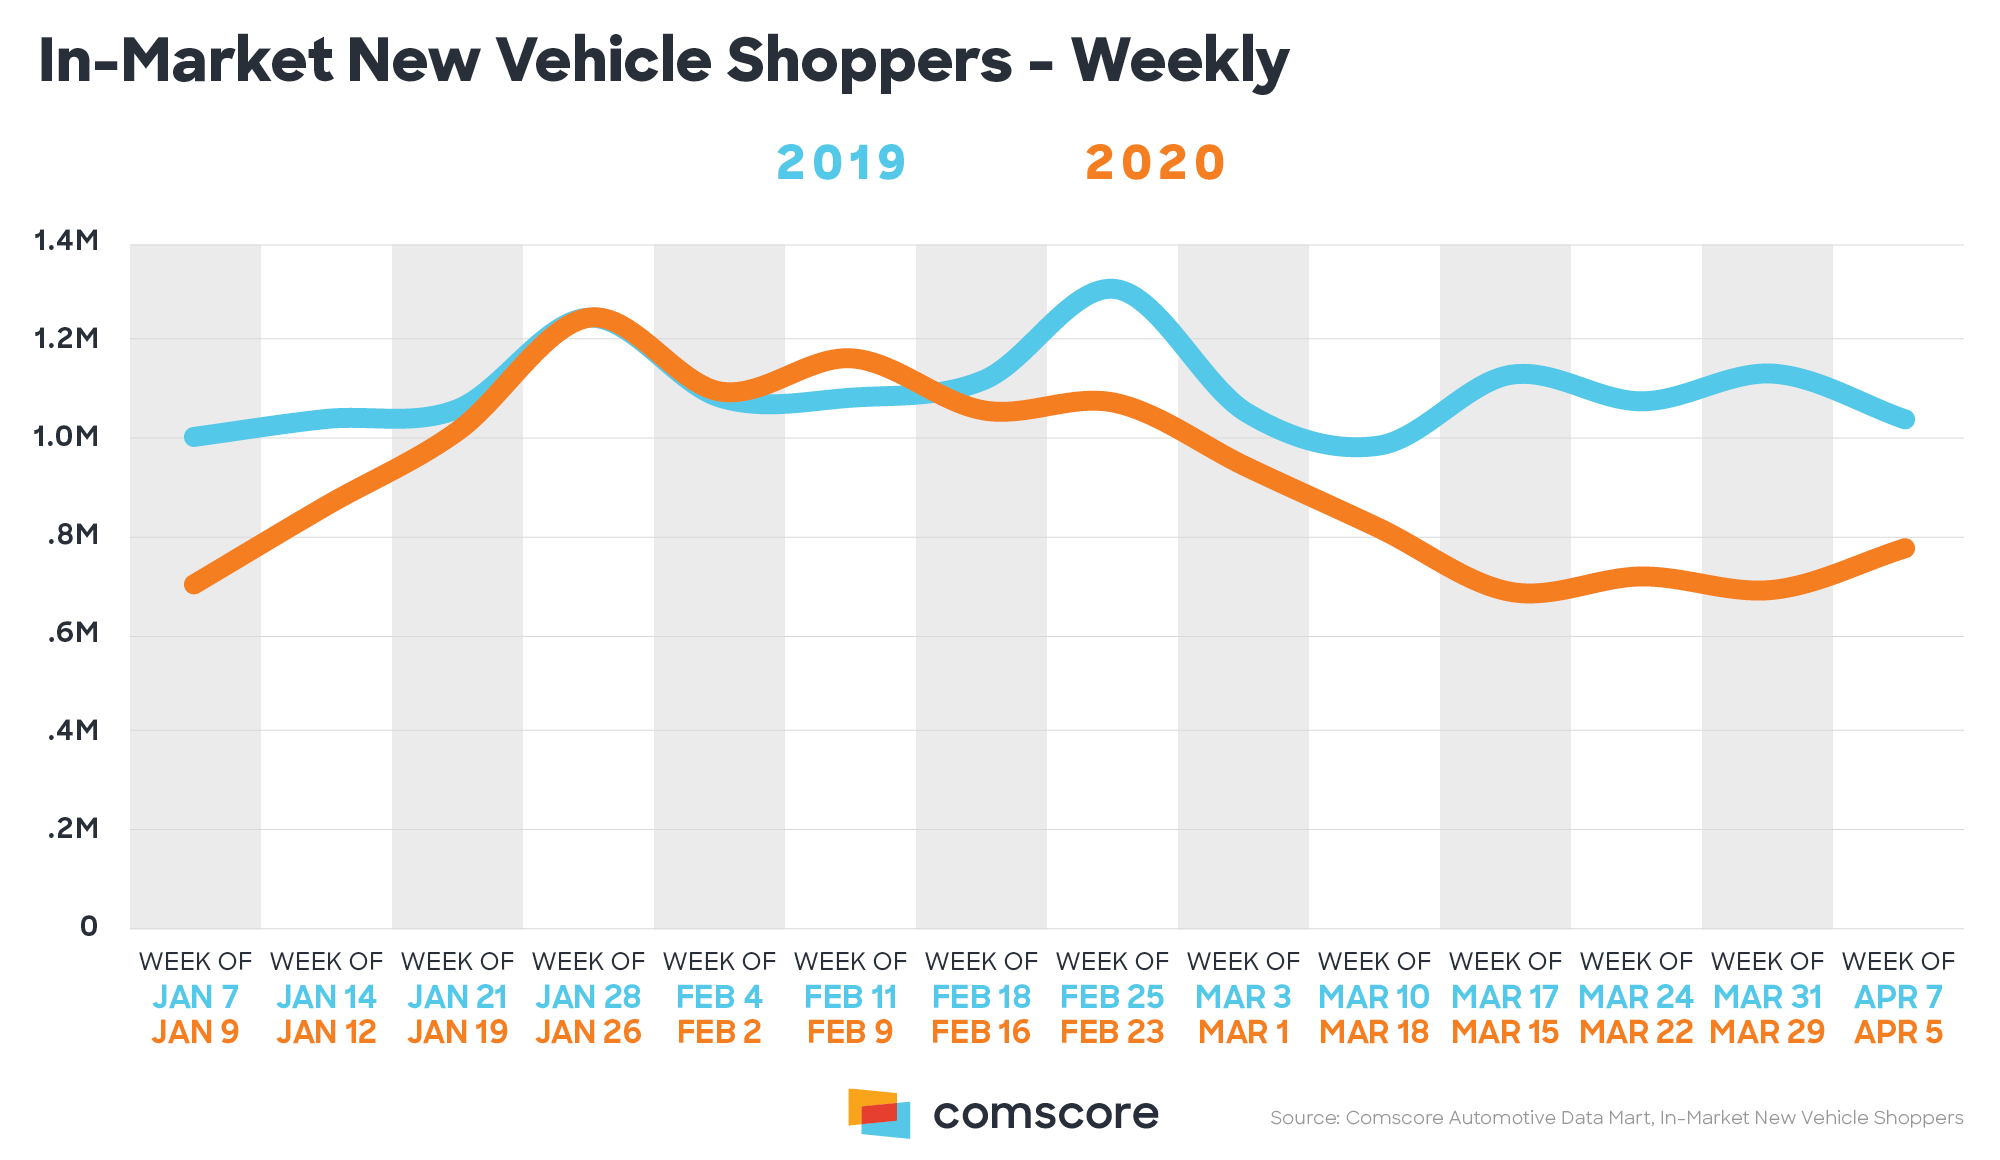 In-Market New Vehicle Shoppers - Weekly